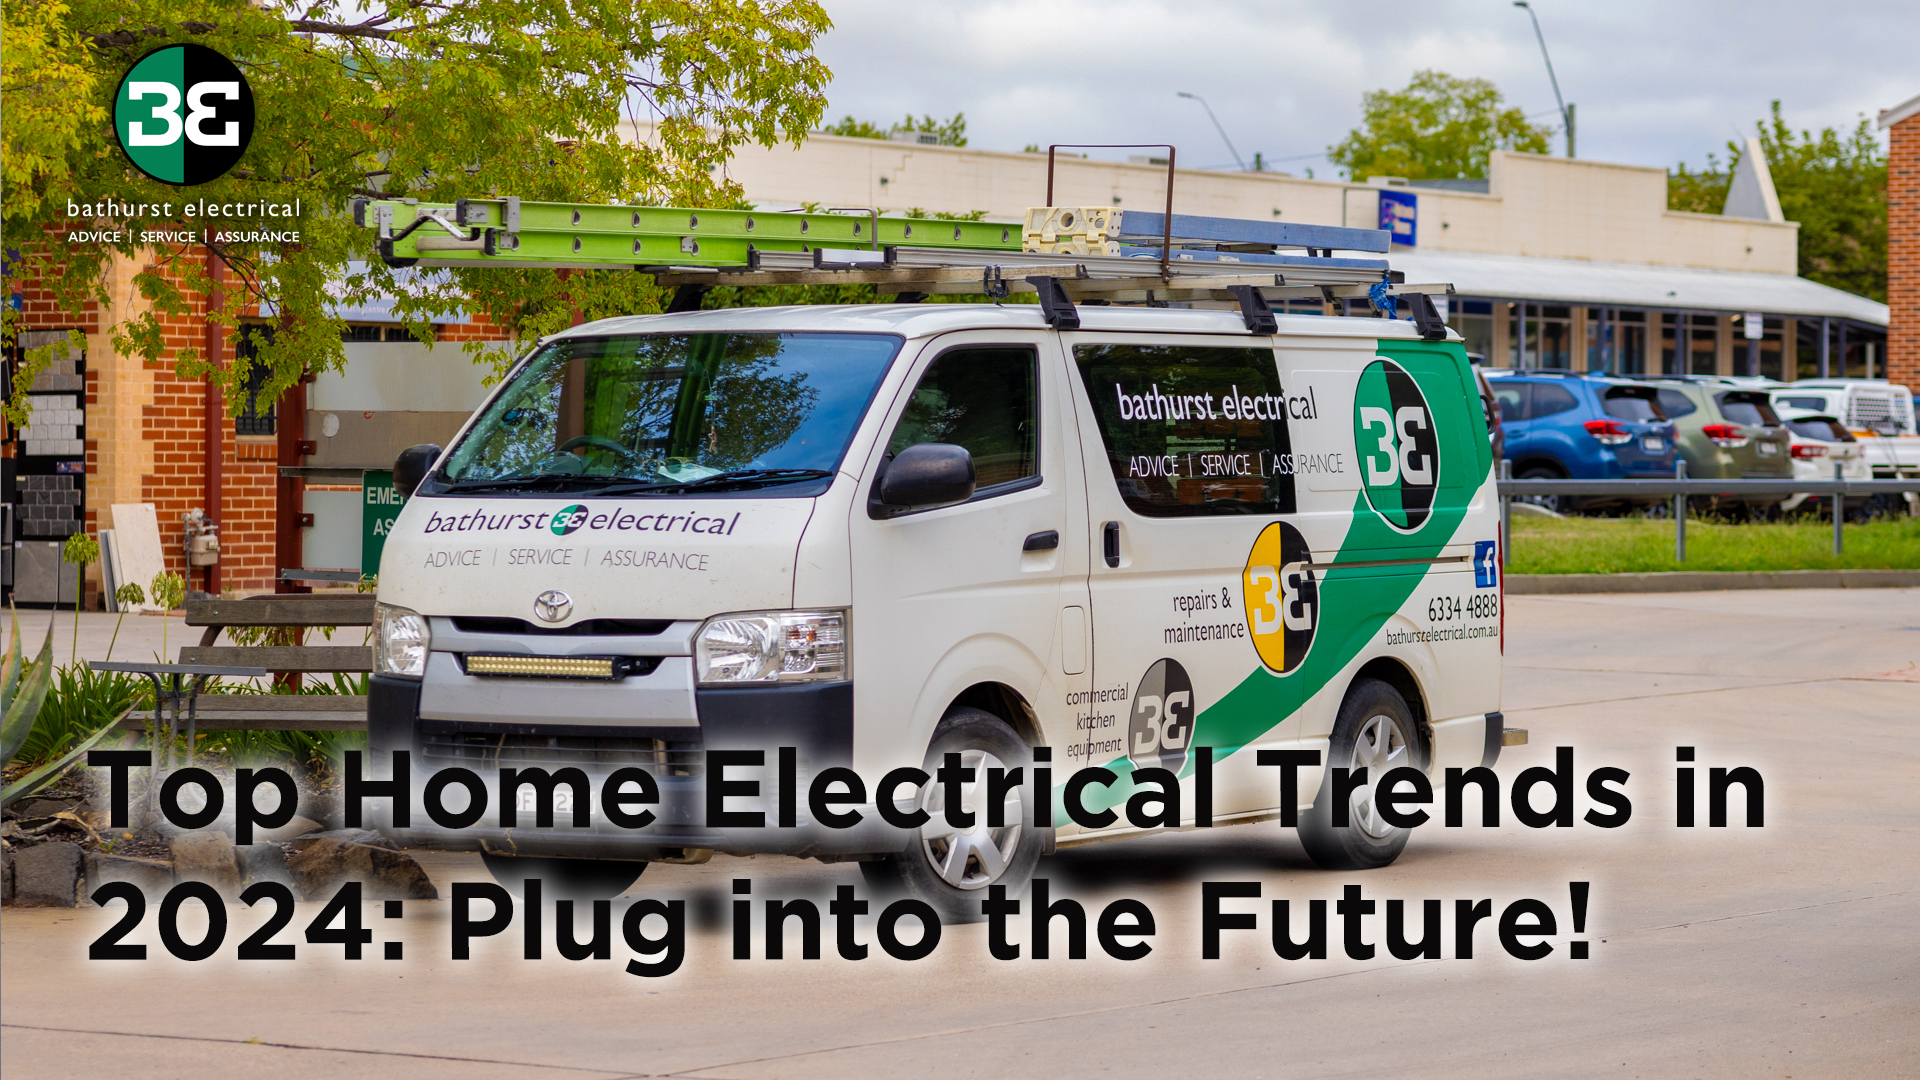 Top Home Electrical Trends in 2024: Plug into the Future!